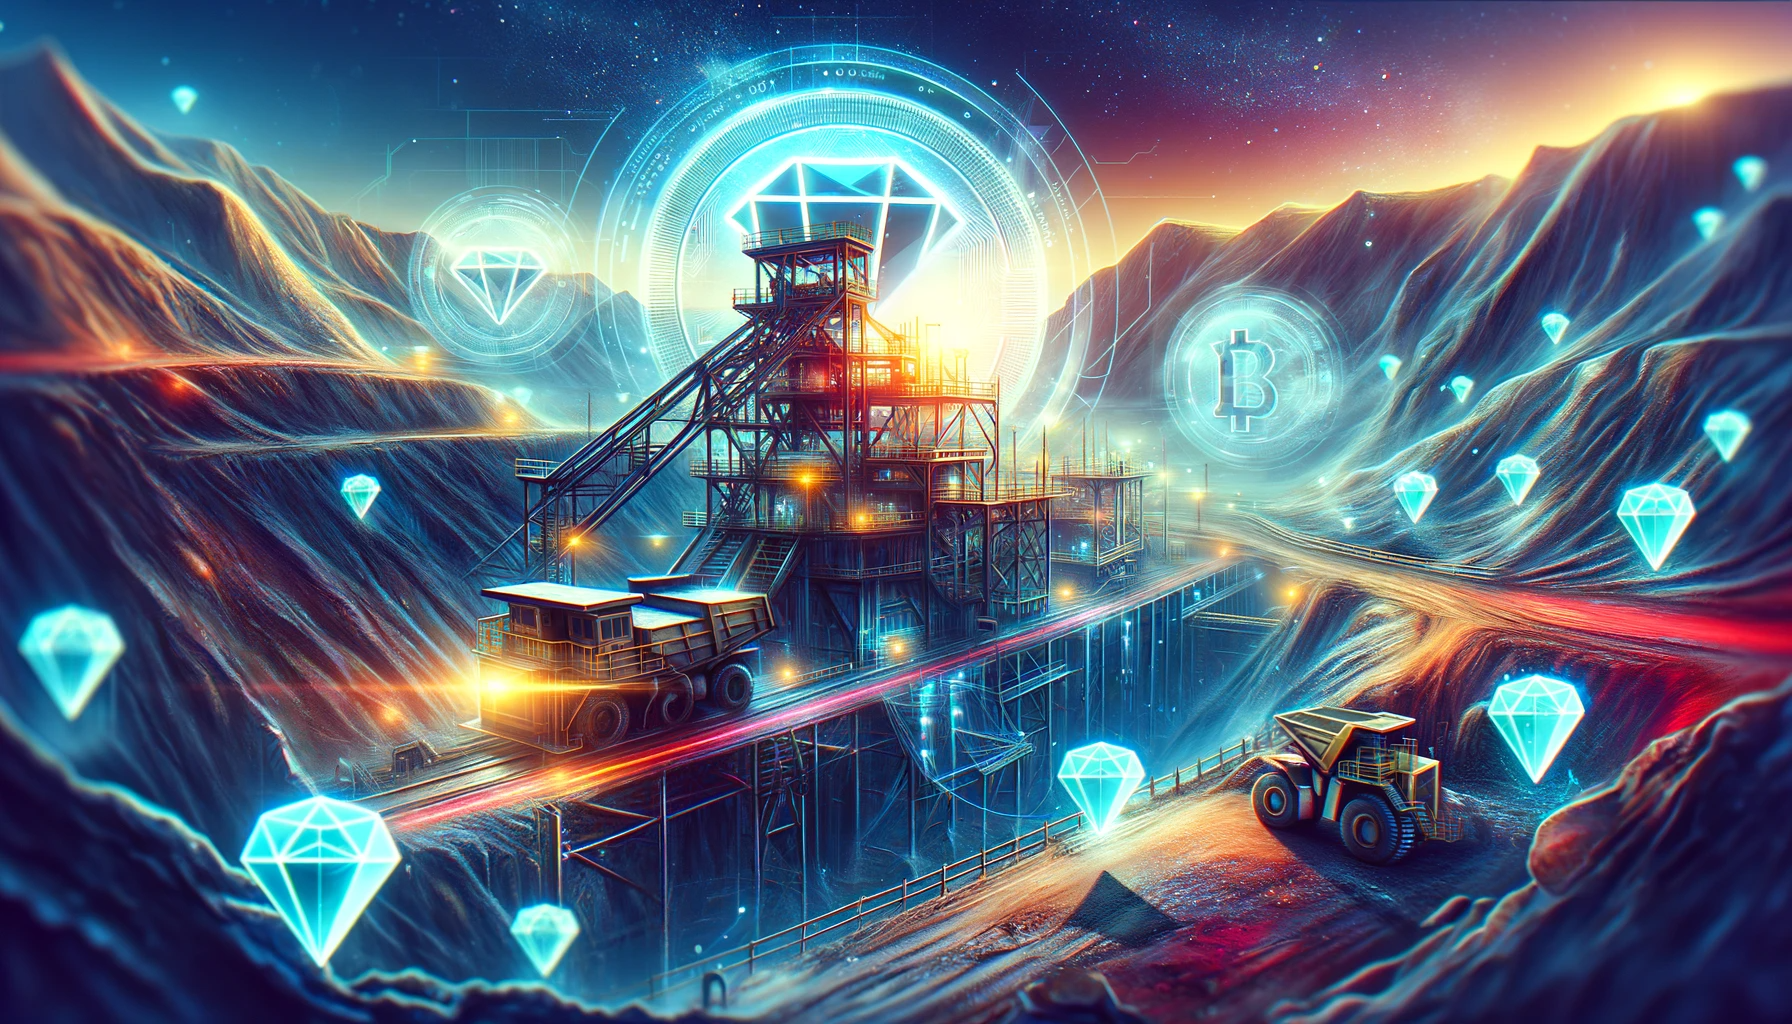 A vivid depiction of a diamond mine with digital tokens overlaying the physical landscape.